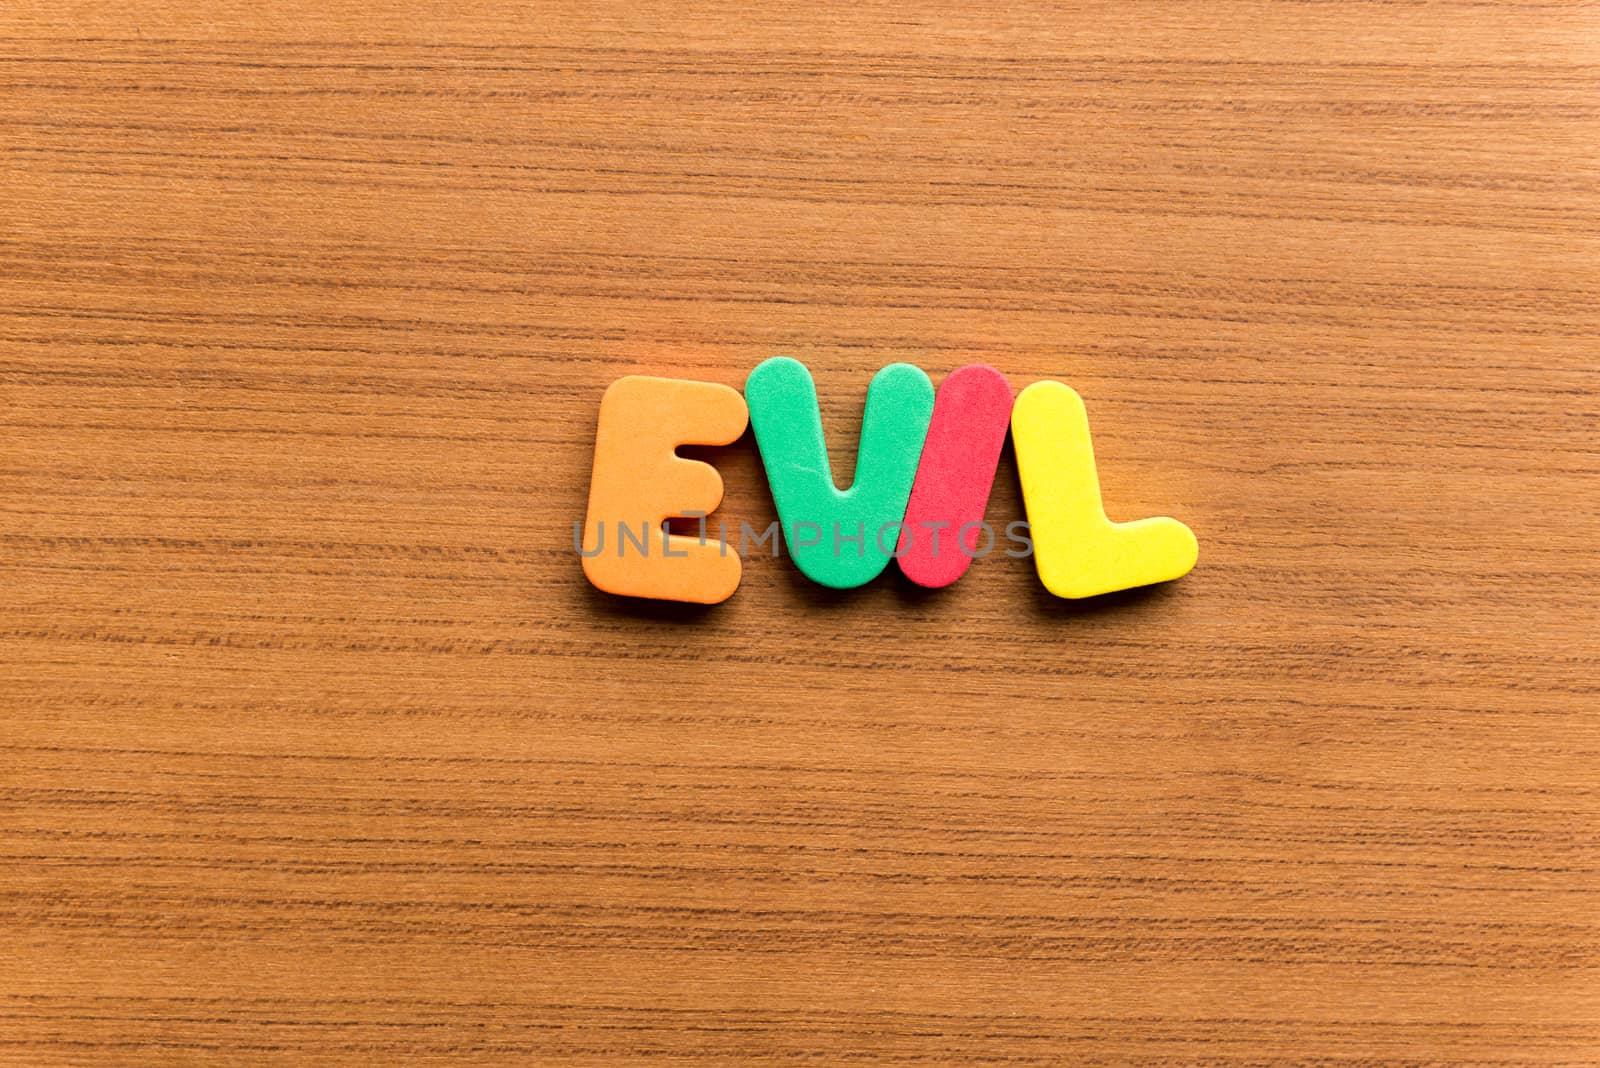 evil colorful word on the wooden background